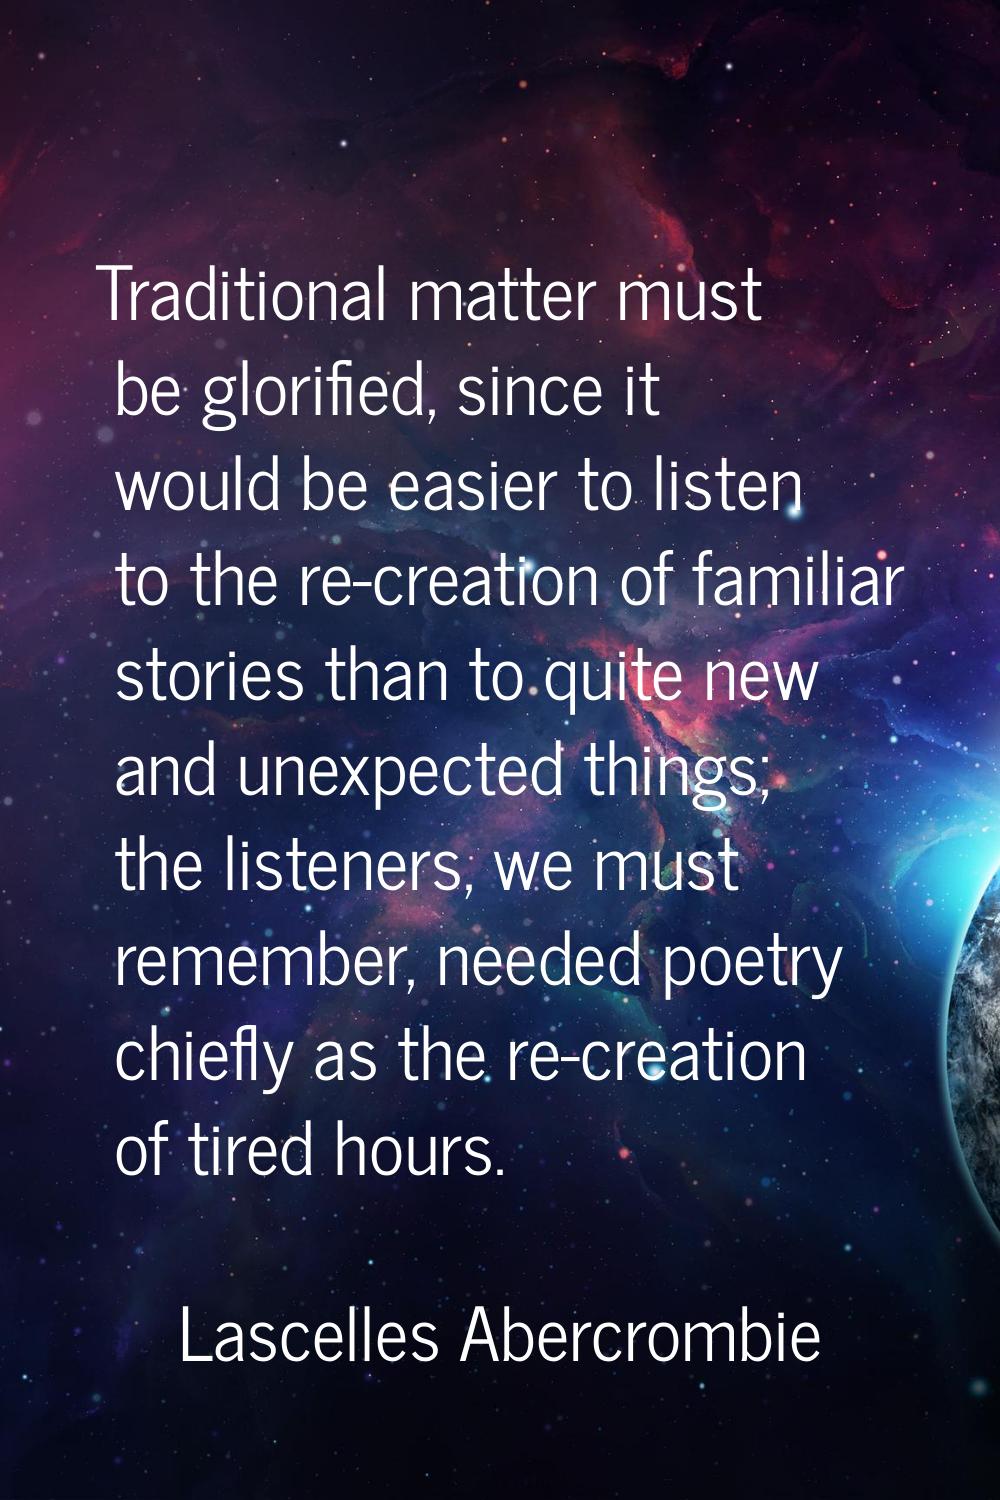 Traditional matter must be glorified, since it would be easier to listen to the re-creation of fami